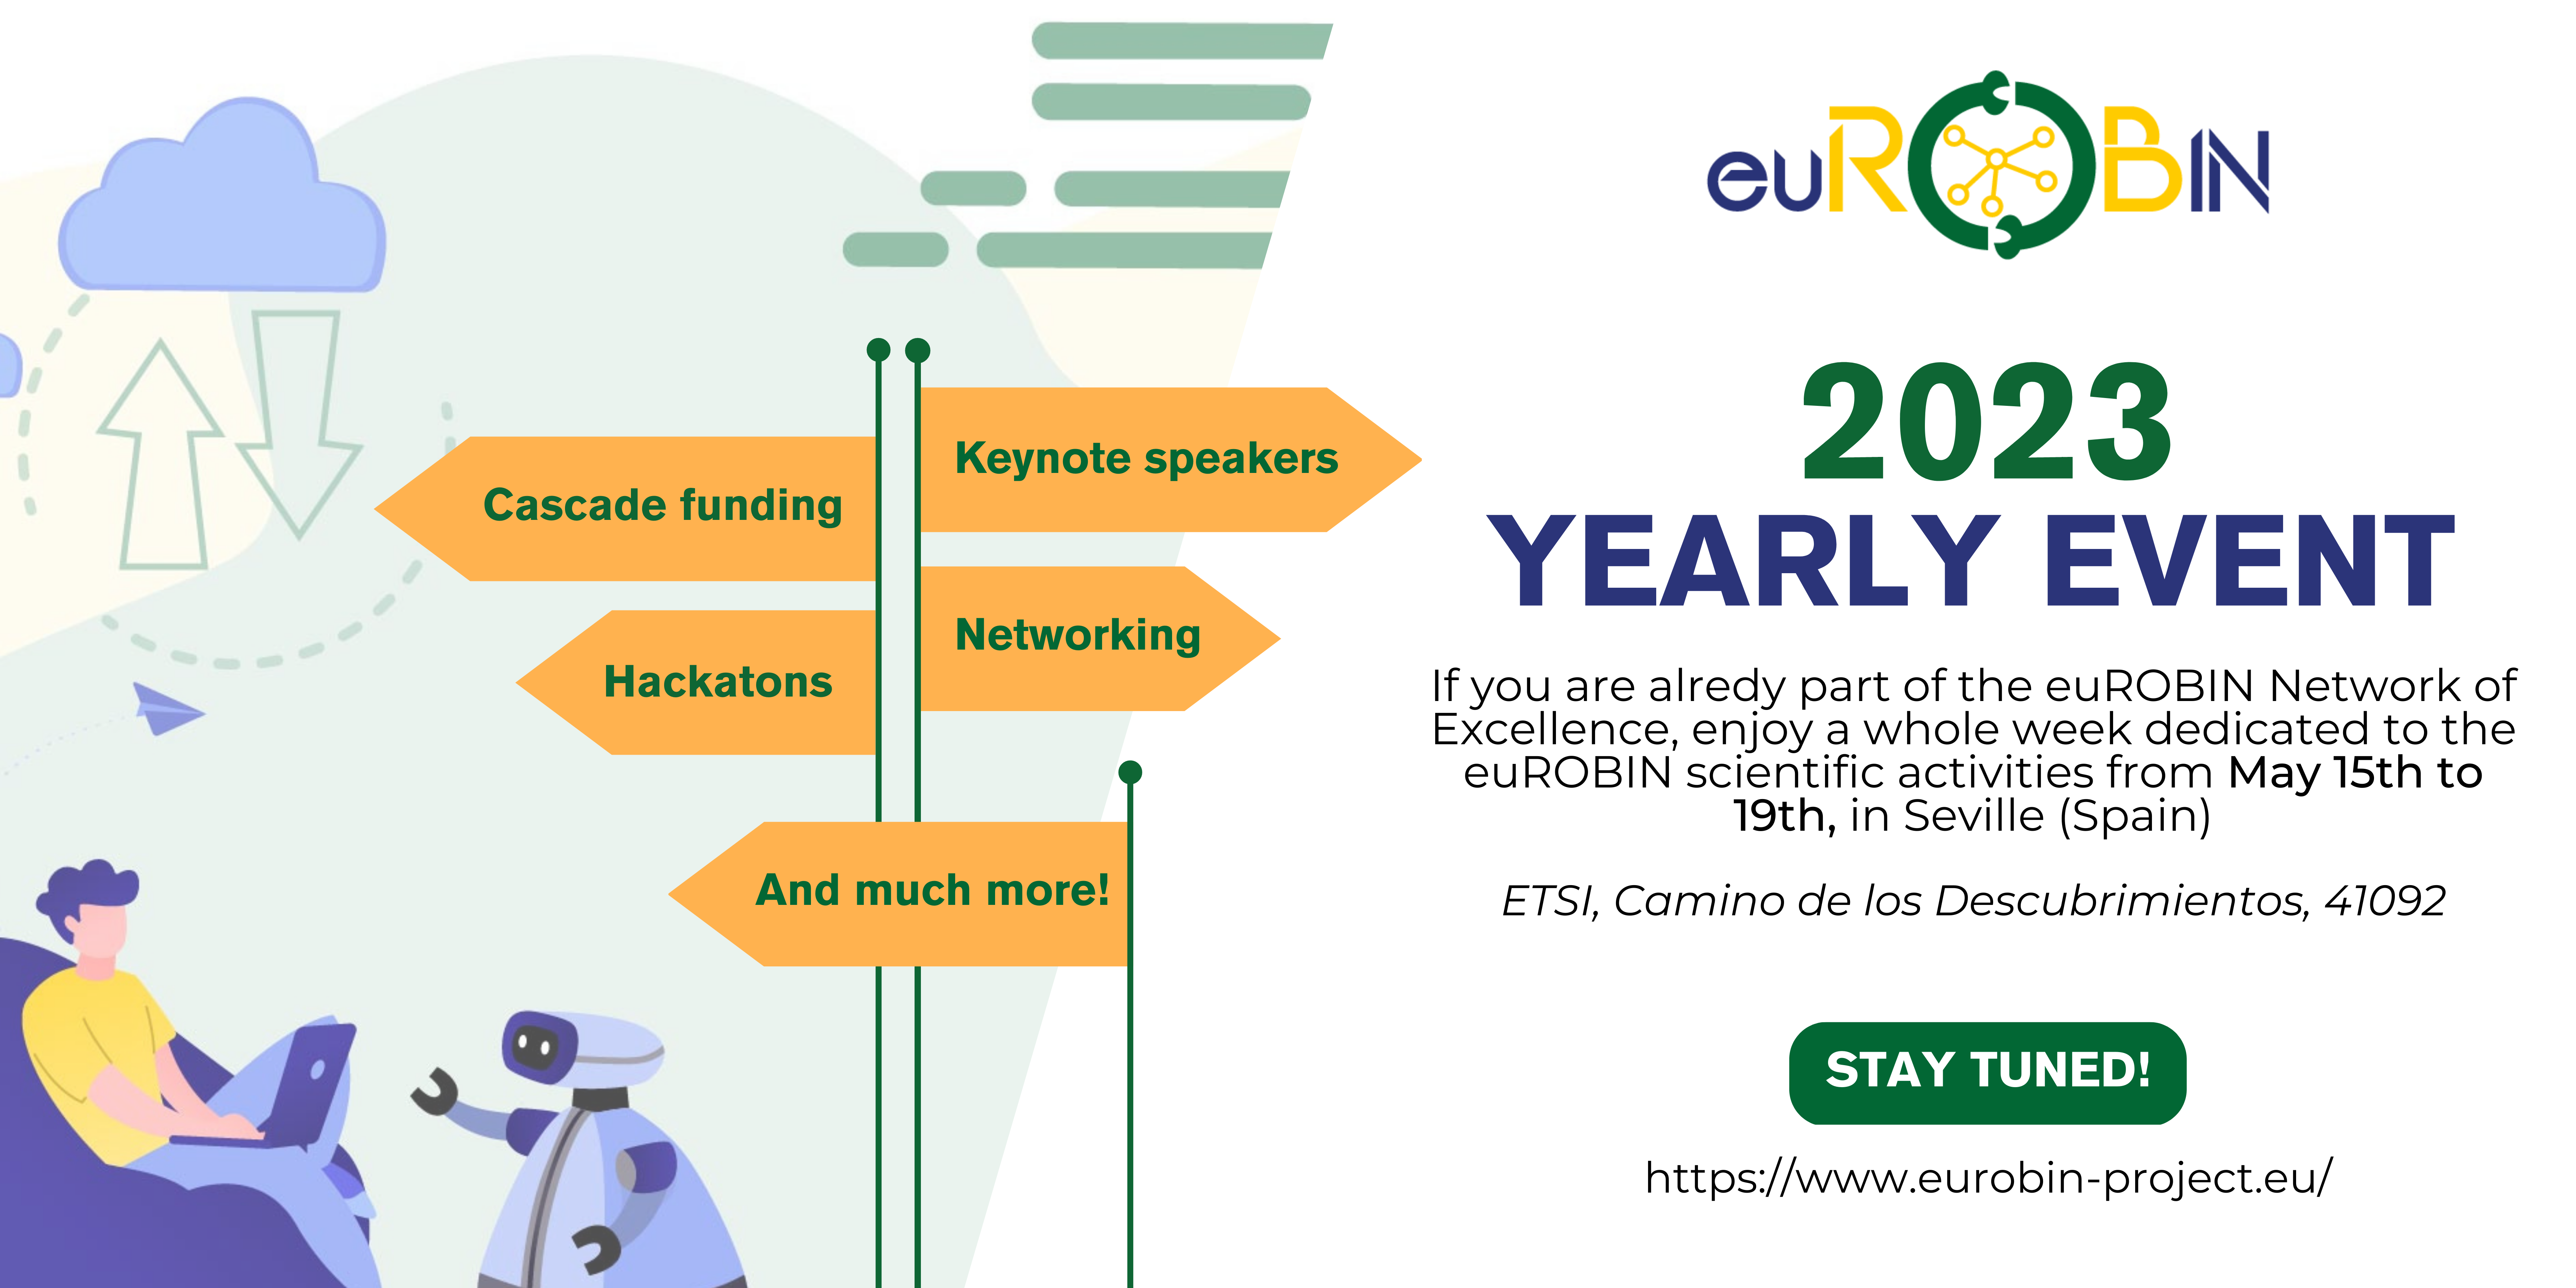 euROBIN Yearly Event 2023